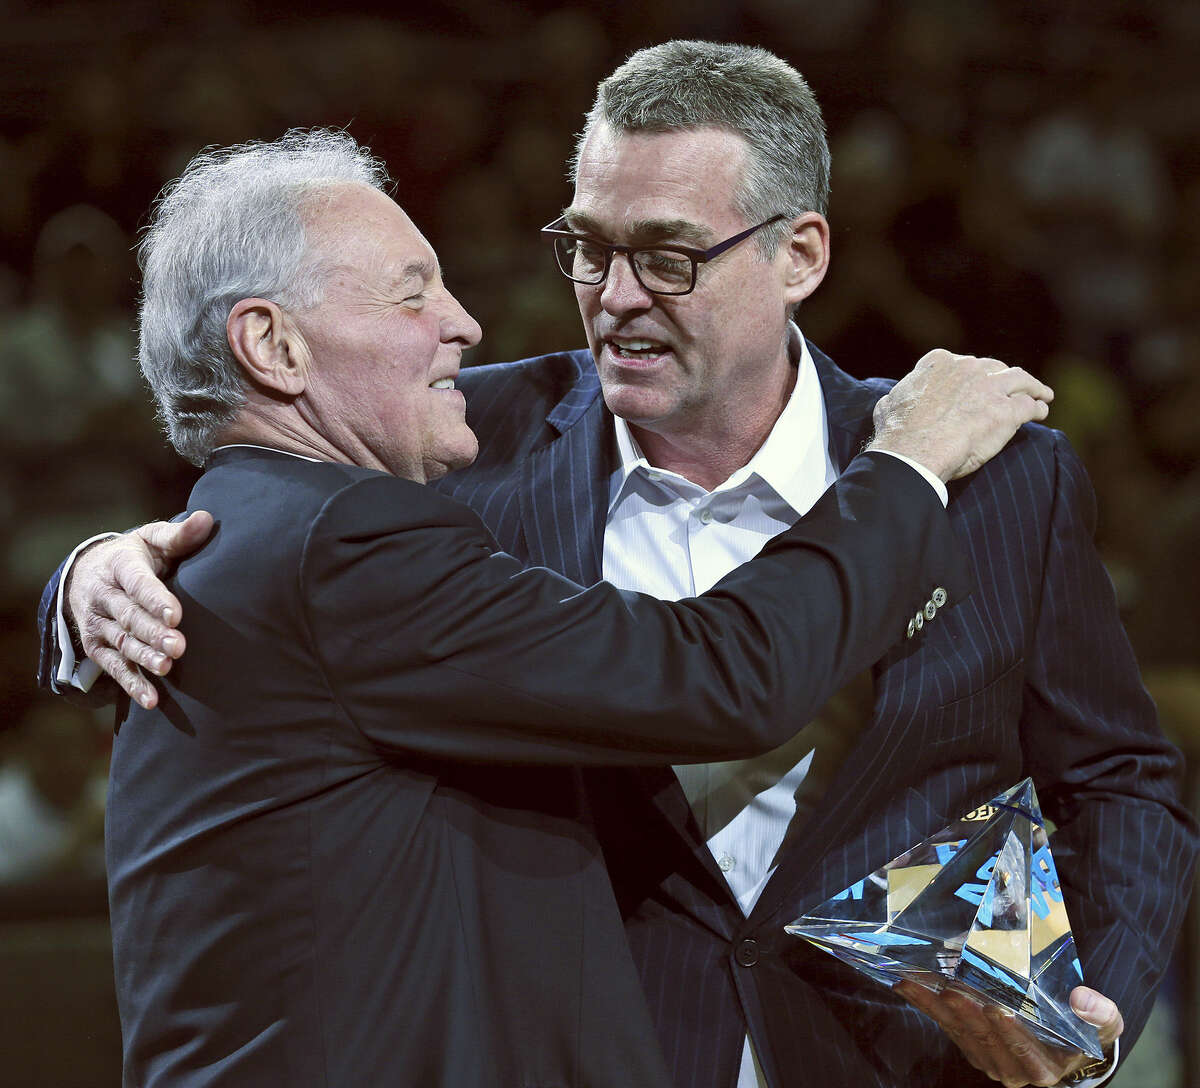 Spurs owner Peter Holt hugs general manager R.C. Buford after giving him his first NBA executive of the year honor before a playoff game against Portland on May 8. Holt and Buford have been the men behind the scenes building the Spurs' dynasty.